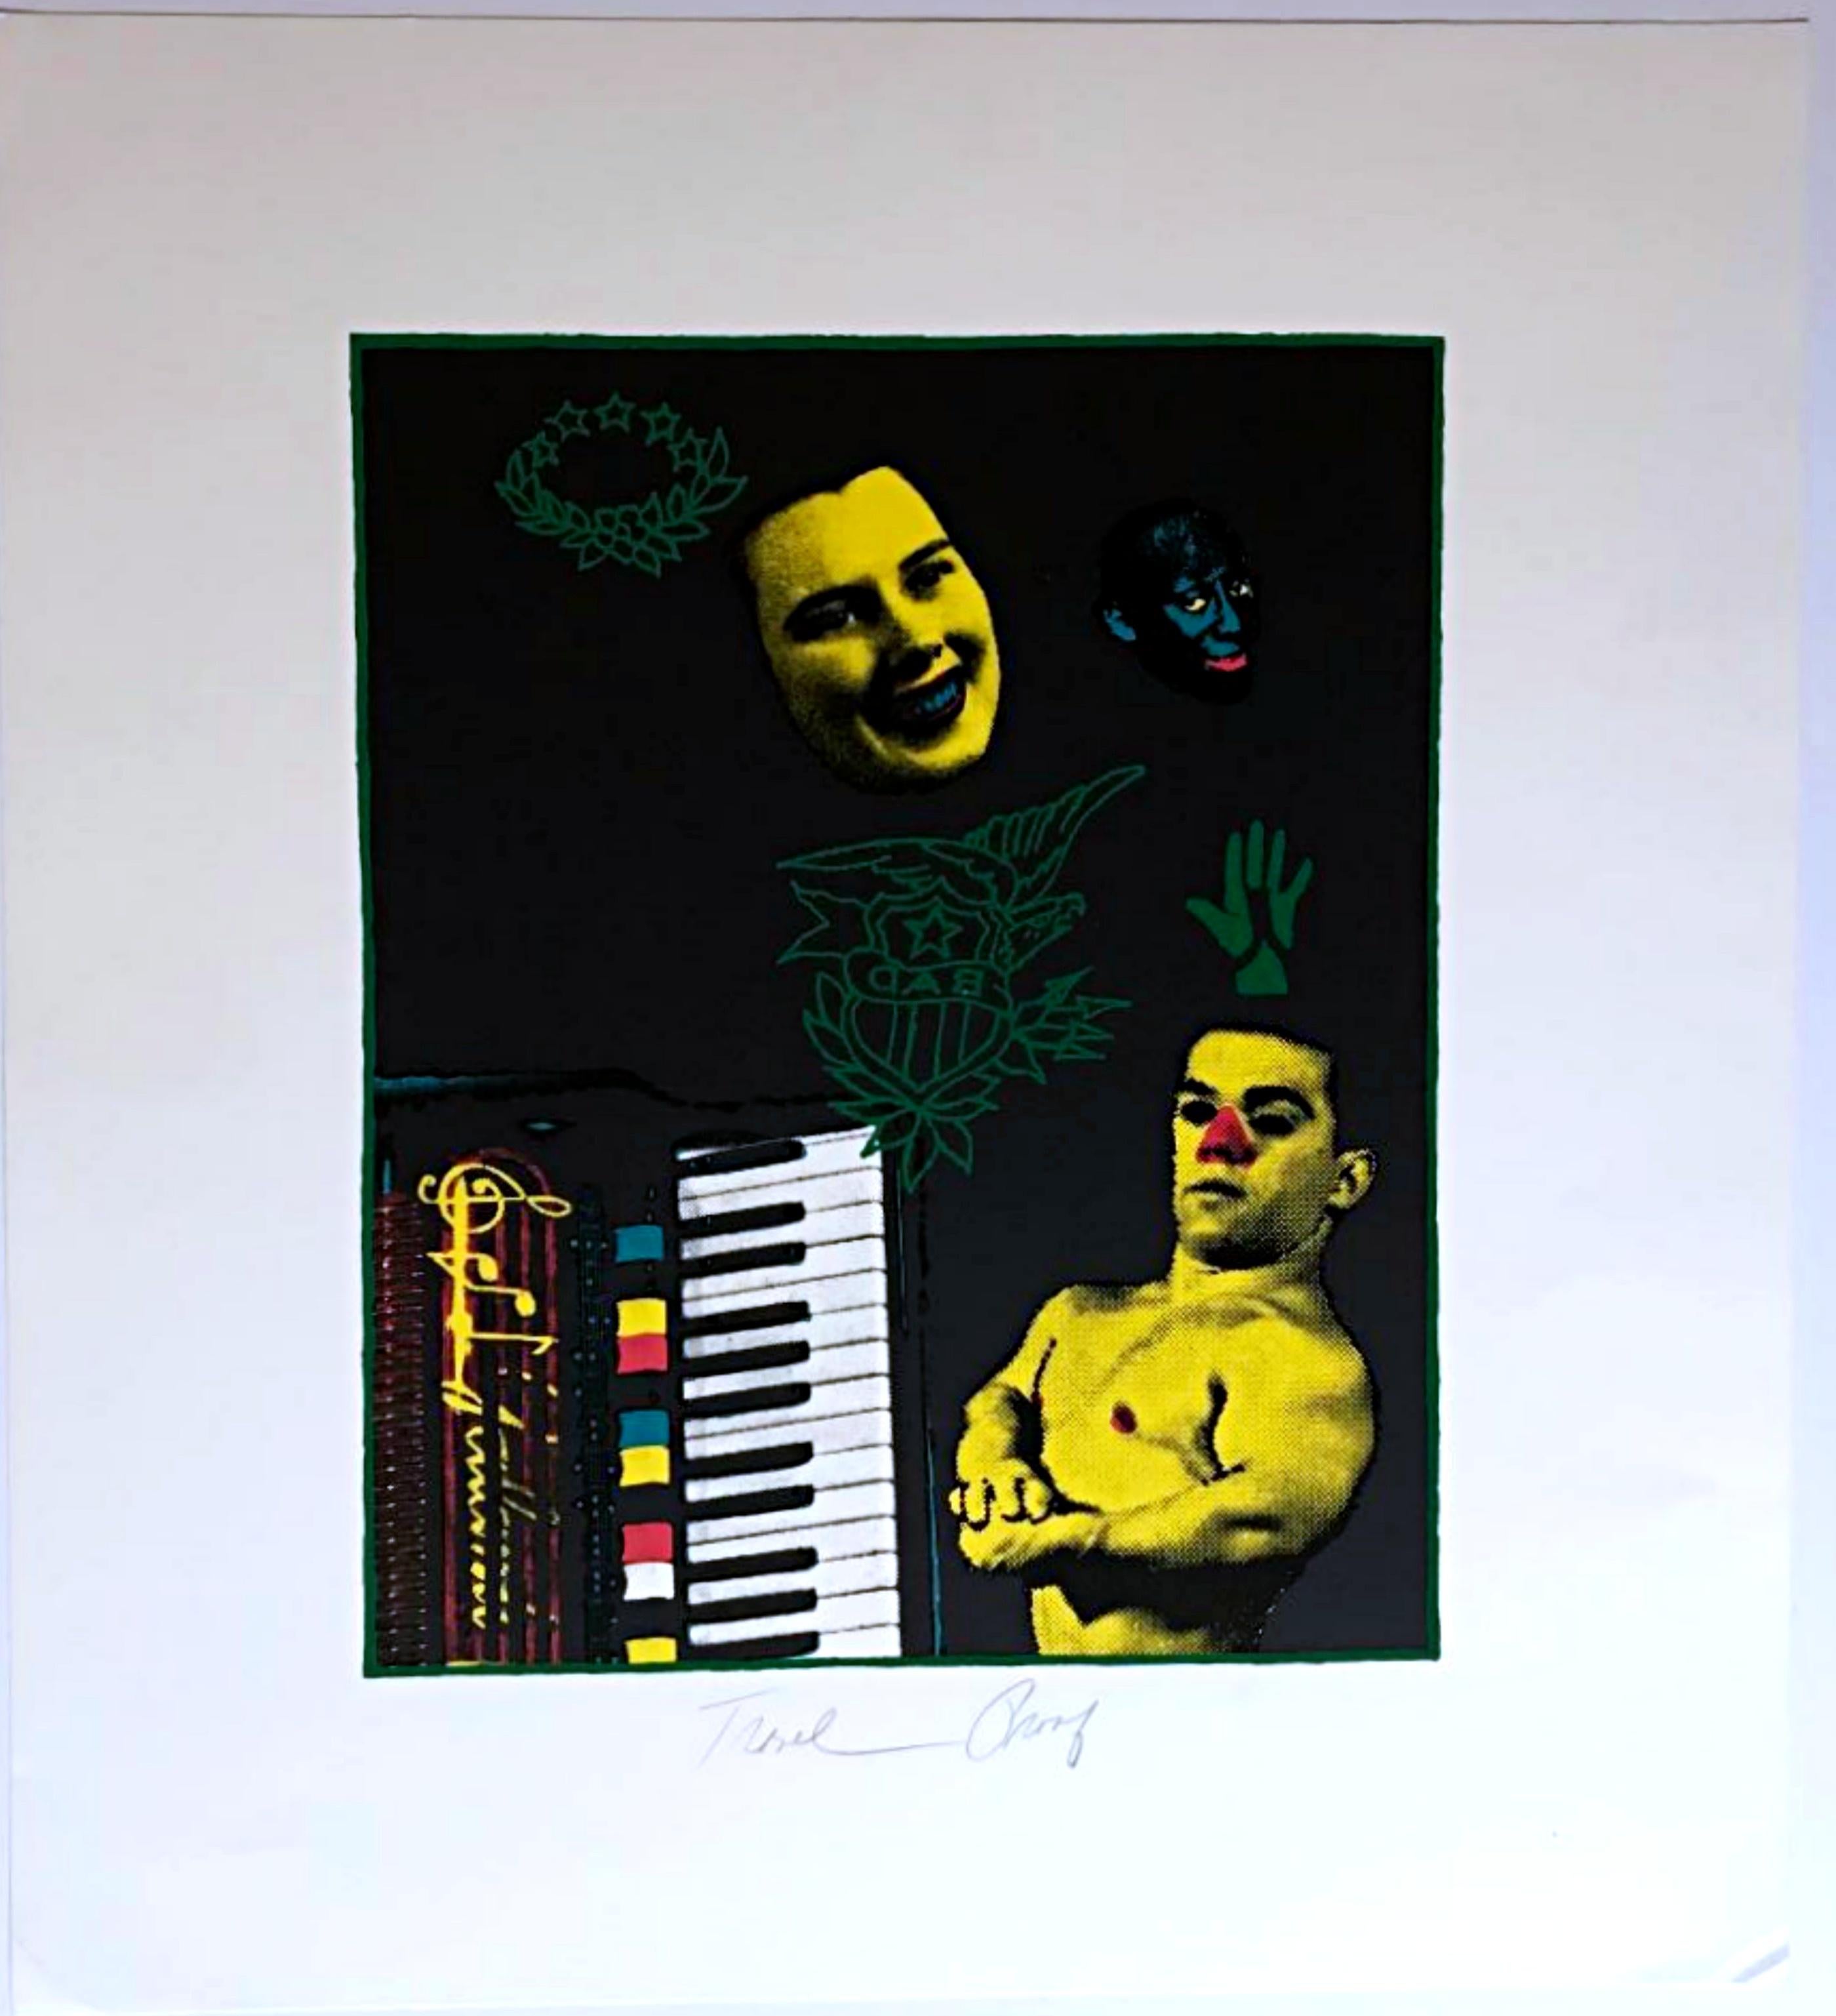 Ed Paschke Figurative Print - BAD (silkscreen and lithograph print) by renowned Chicago artist expressiionist